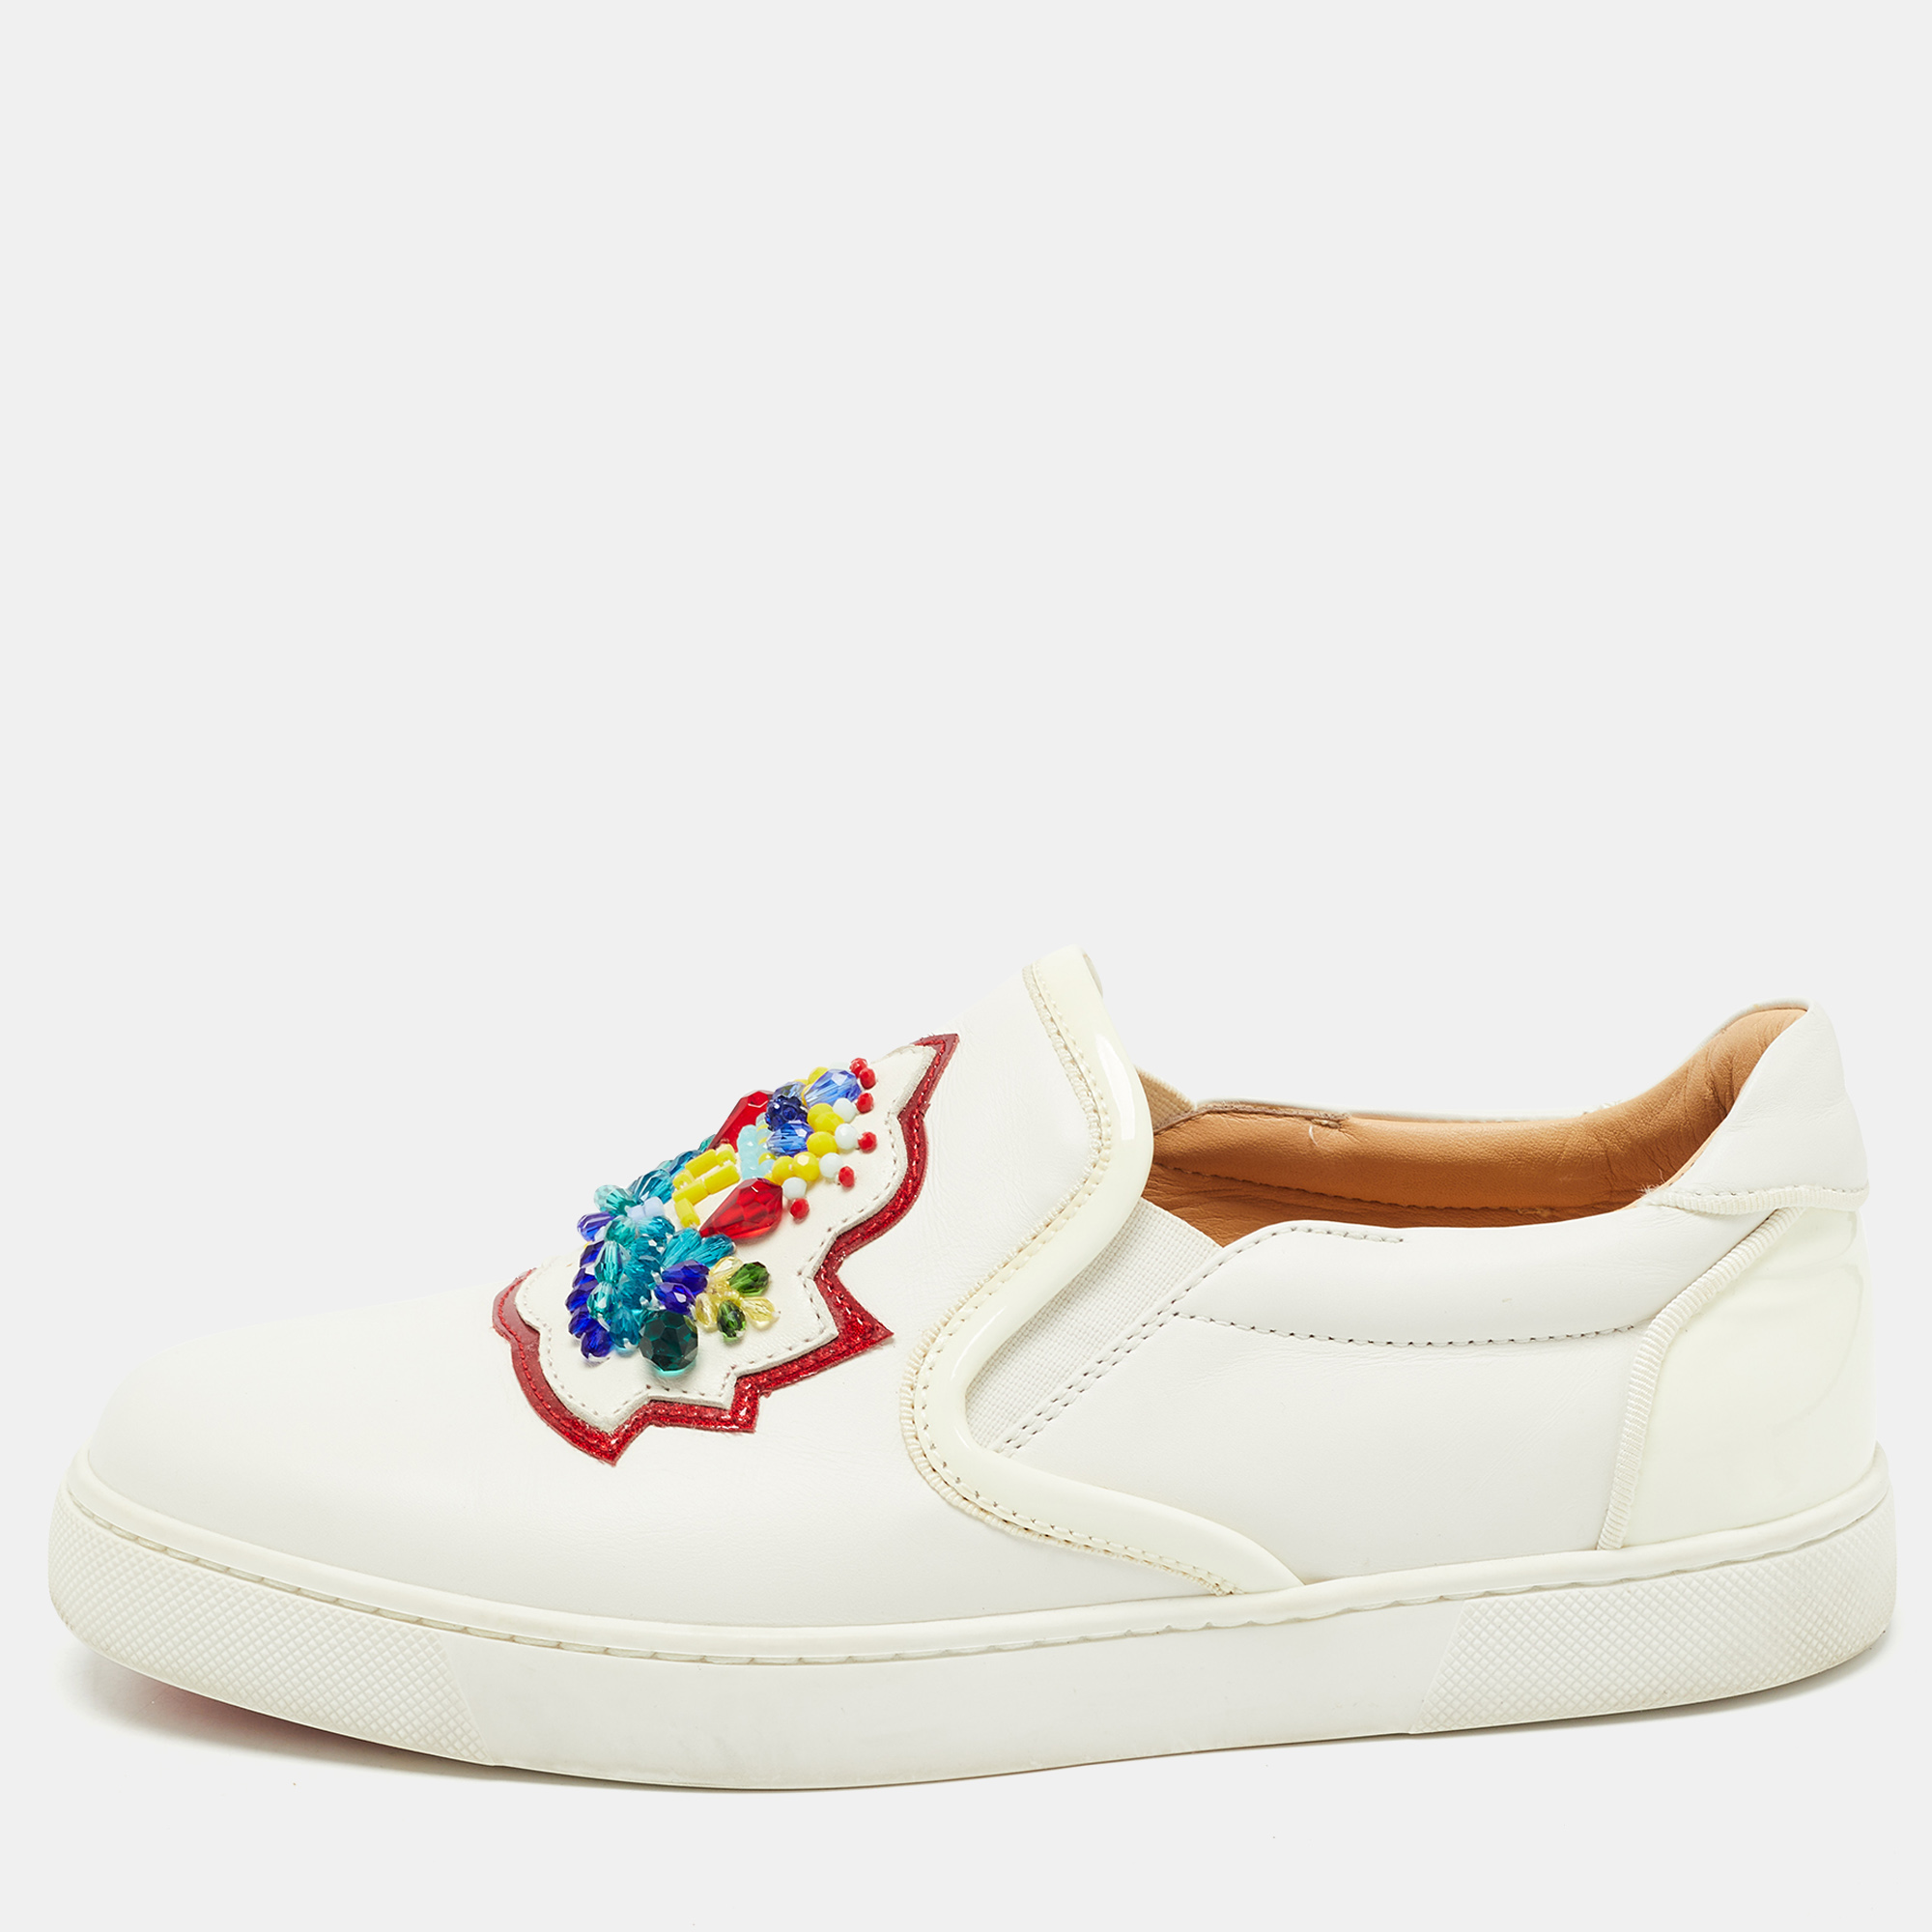 Pre-owned Christian Louboutin White Leather Embellished Low Top Sneakers Size 37.5